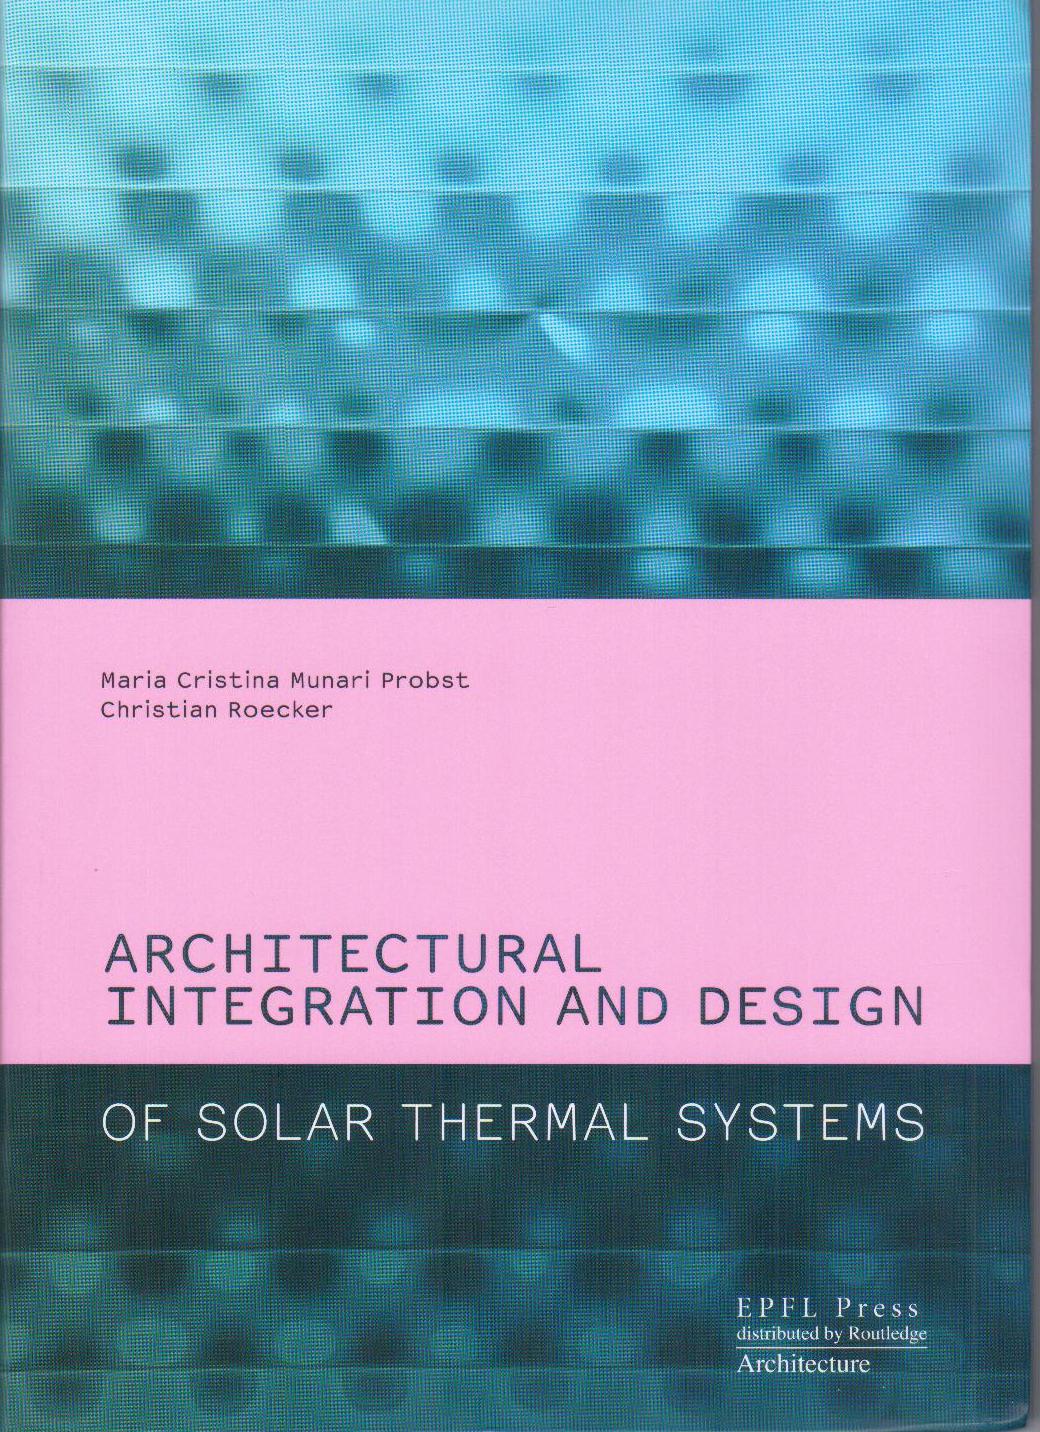 Architectural Integration and Design of Solar Thermal Systems Maria Cristina Munari Probst and Christian Roecker